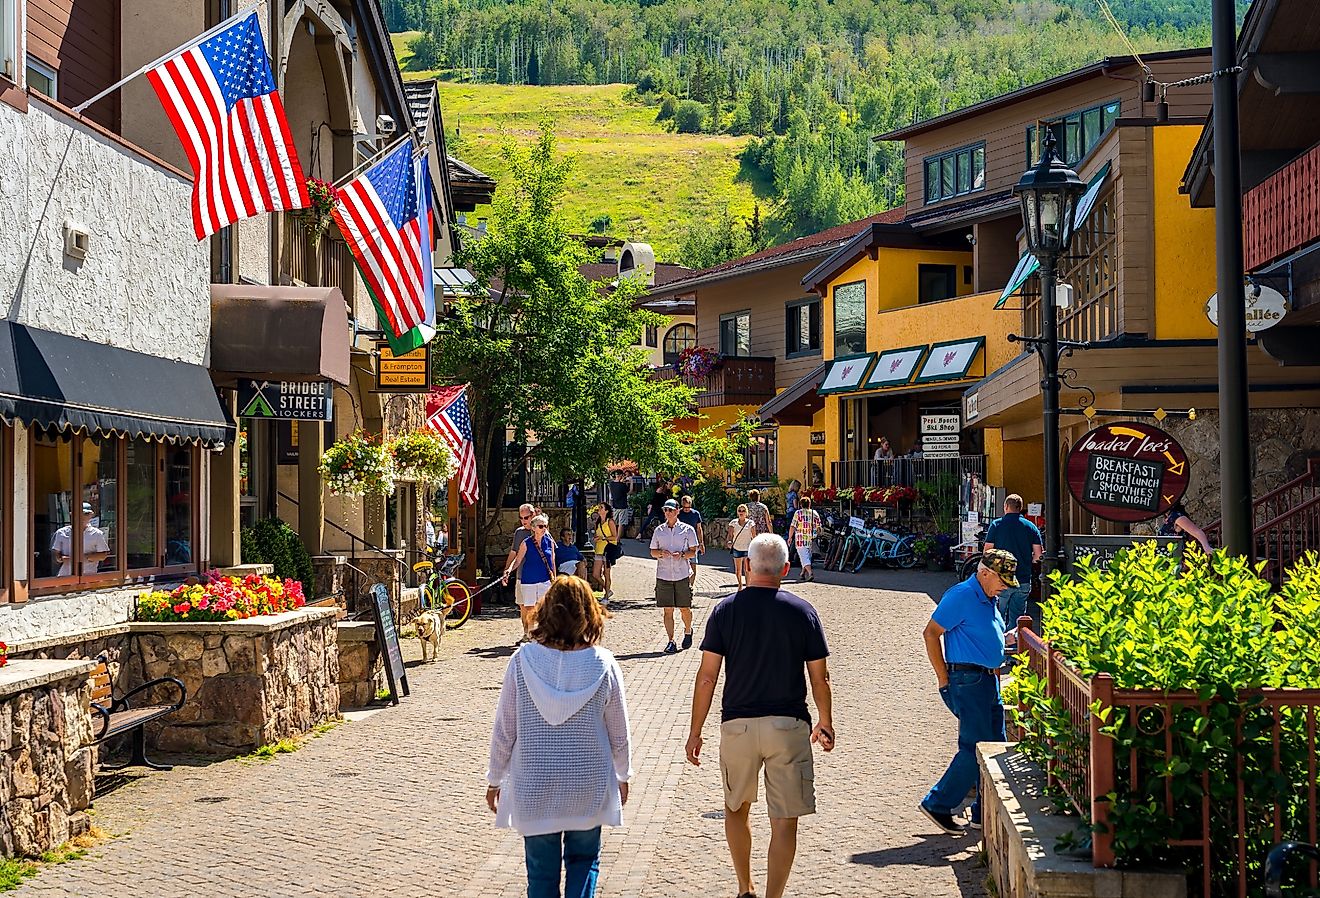 Downtown street in Vail, Colorado. Image credit Alex Cimbal via Shutterstock